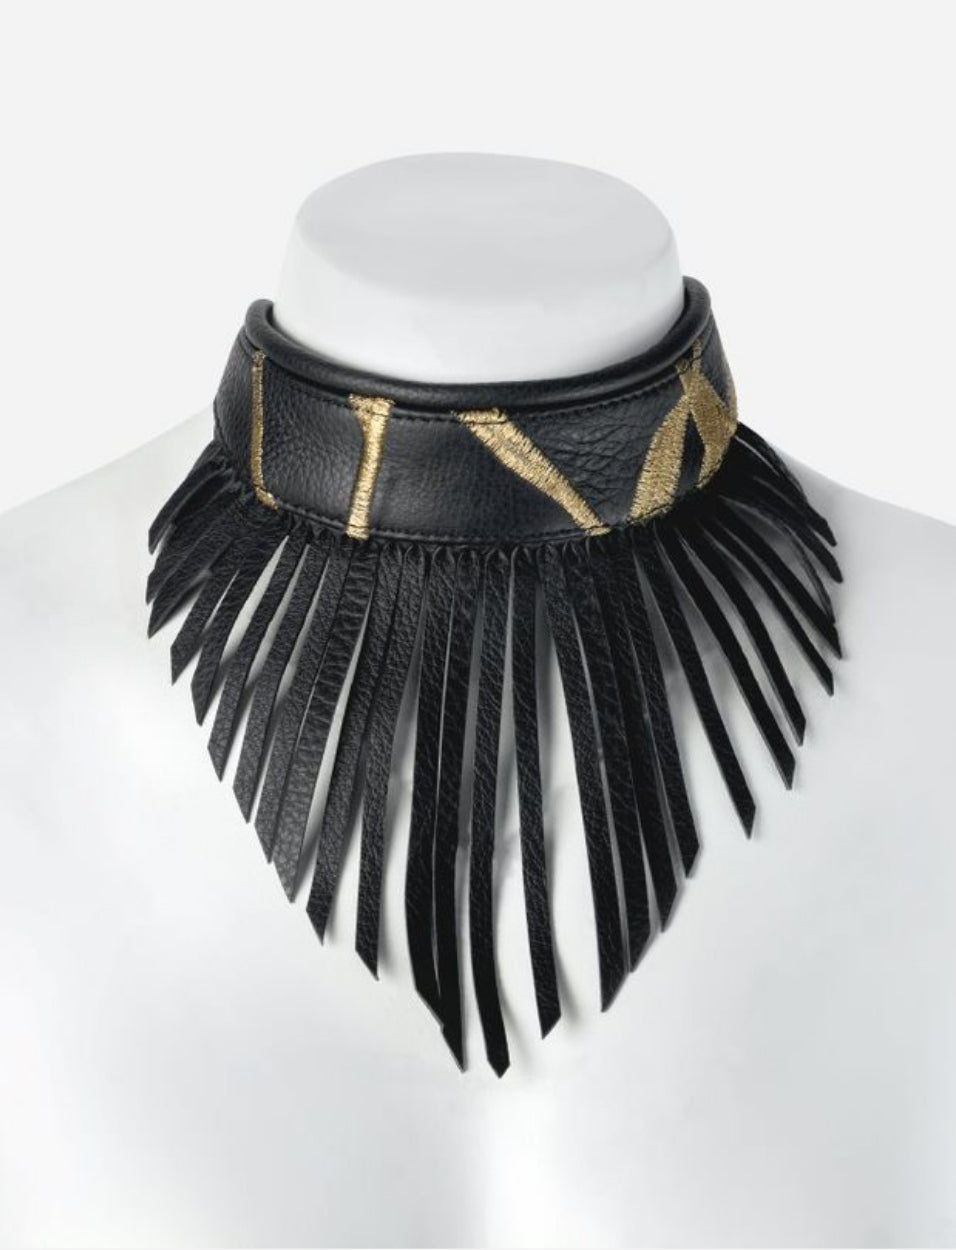 Maeve Necklace in Black